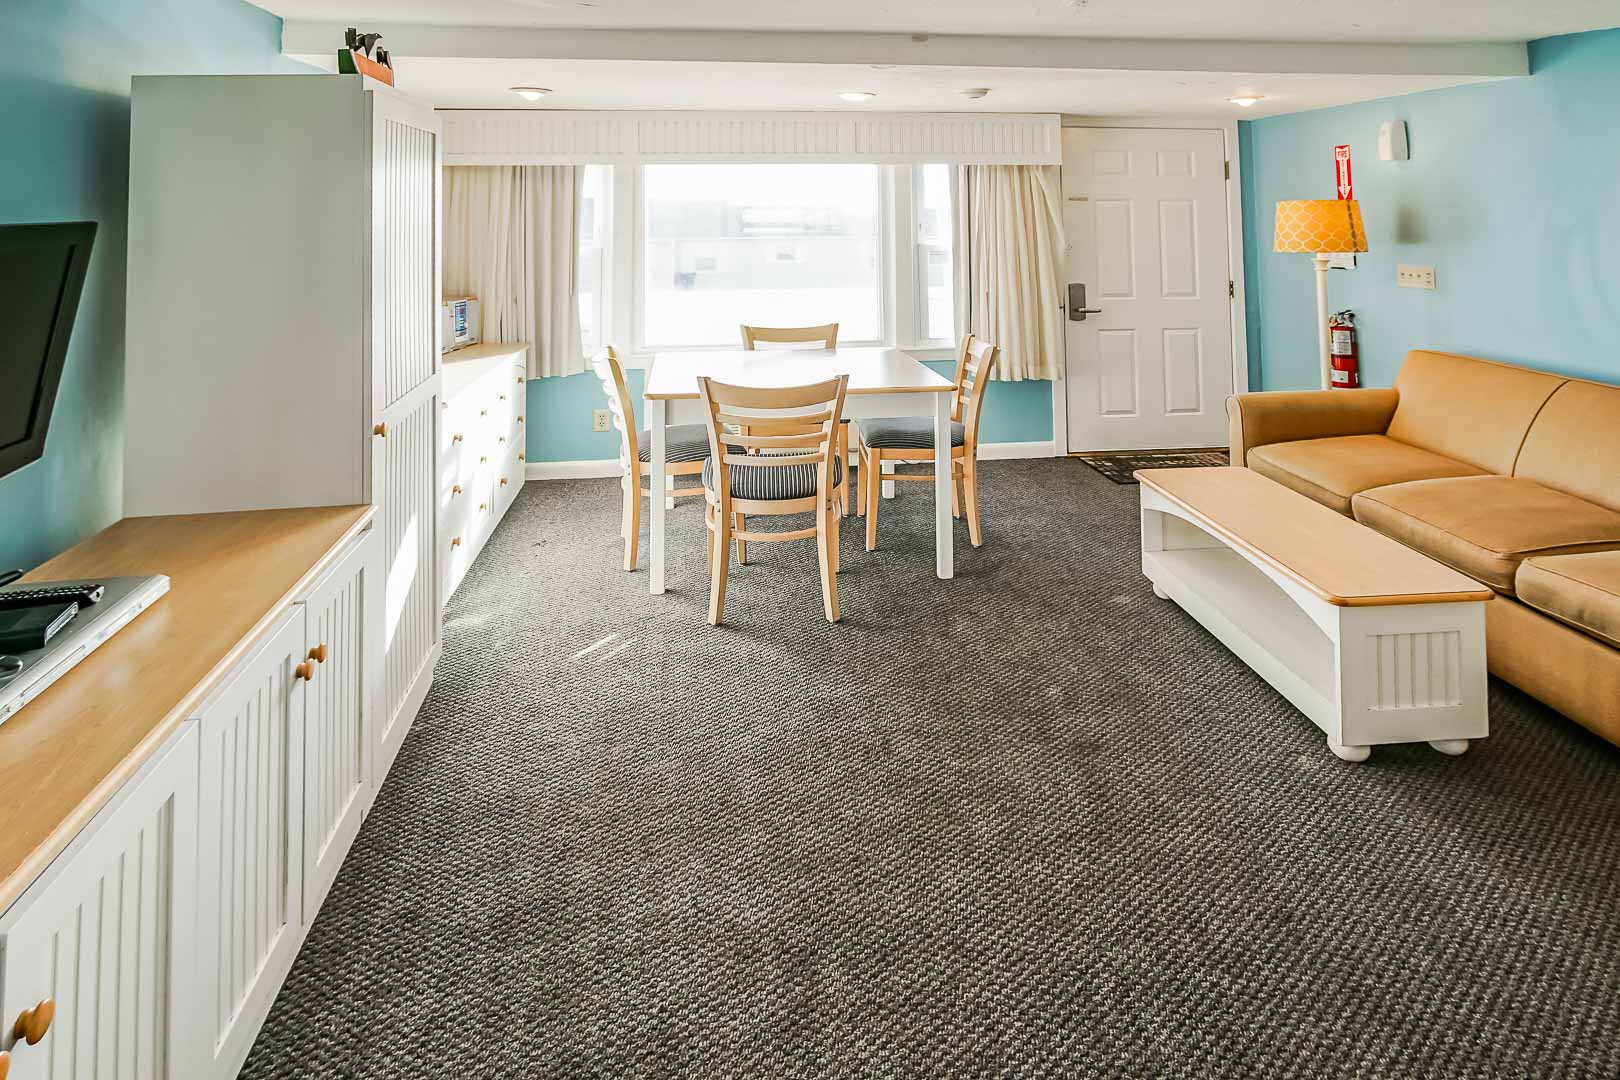 A standard dining and living room area at VRI's Seawinds II Resort in Massachusetts.